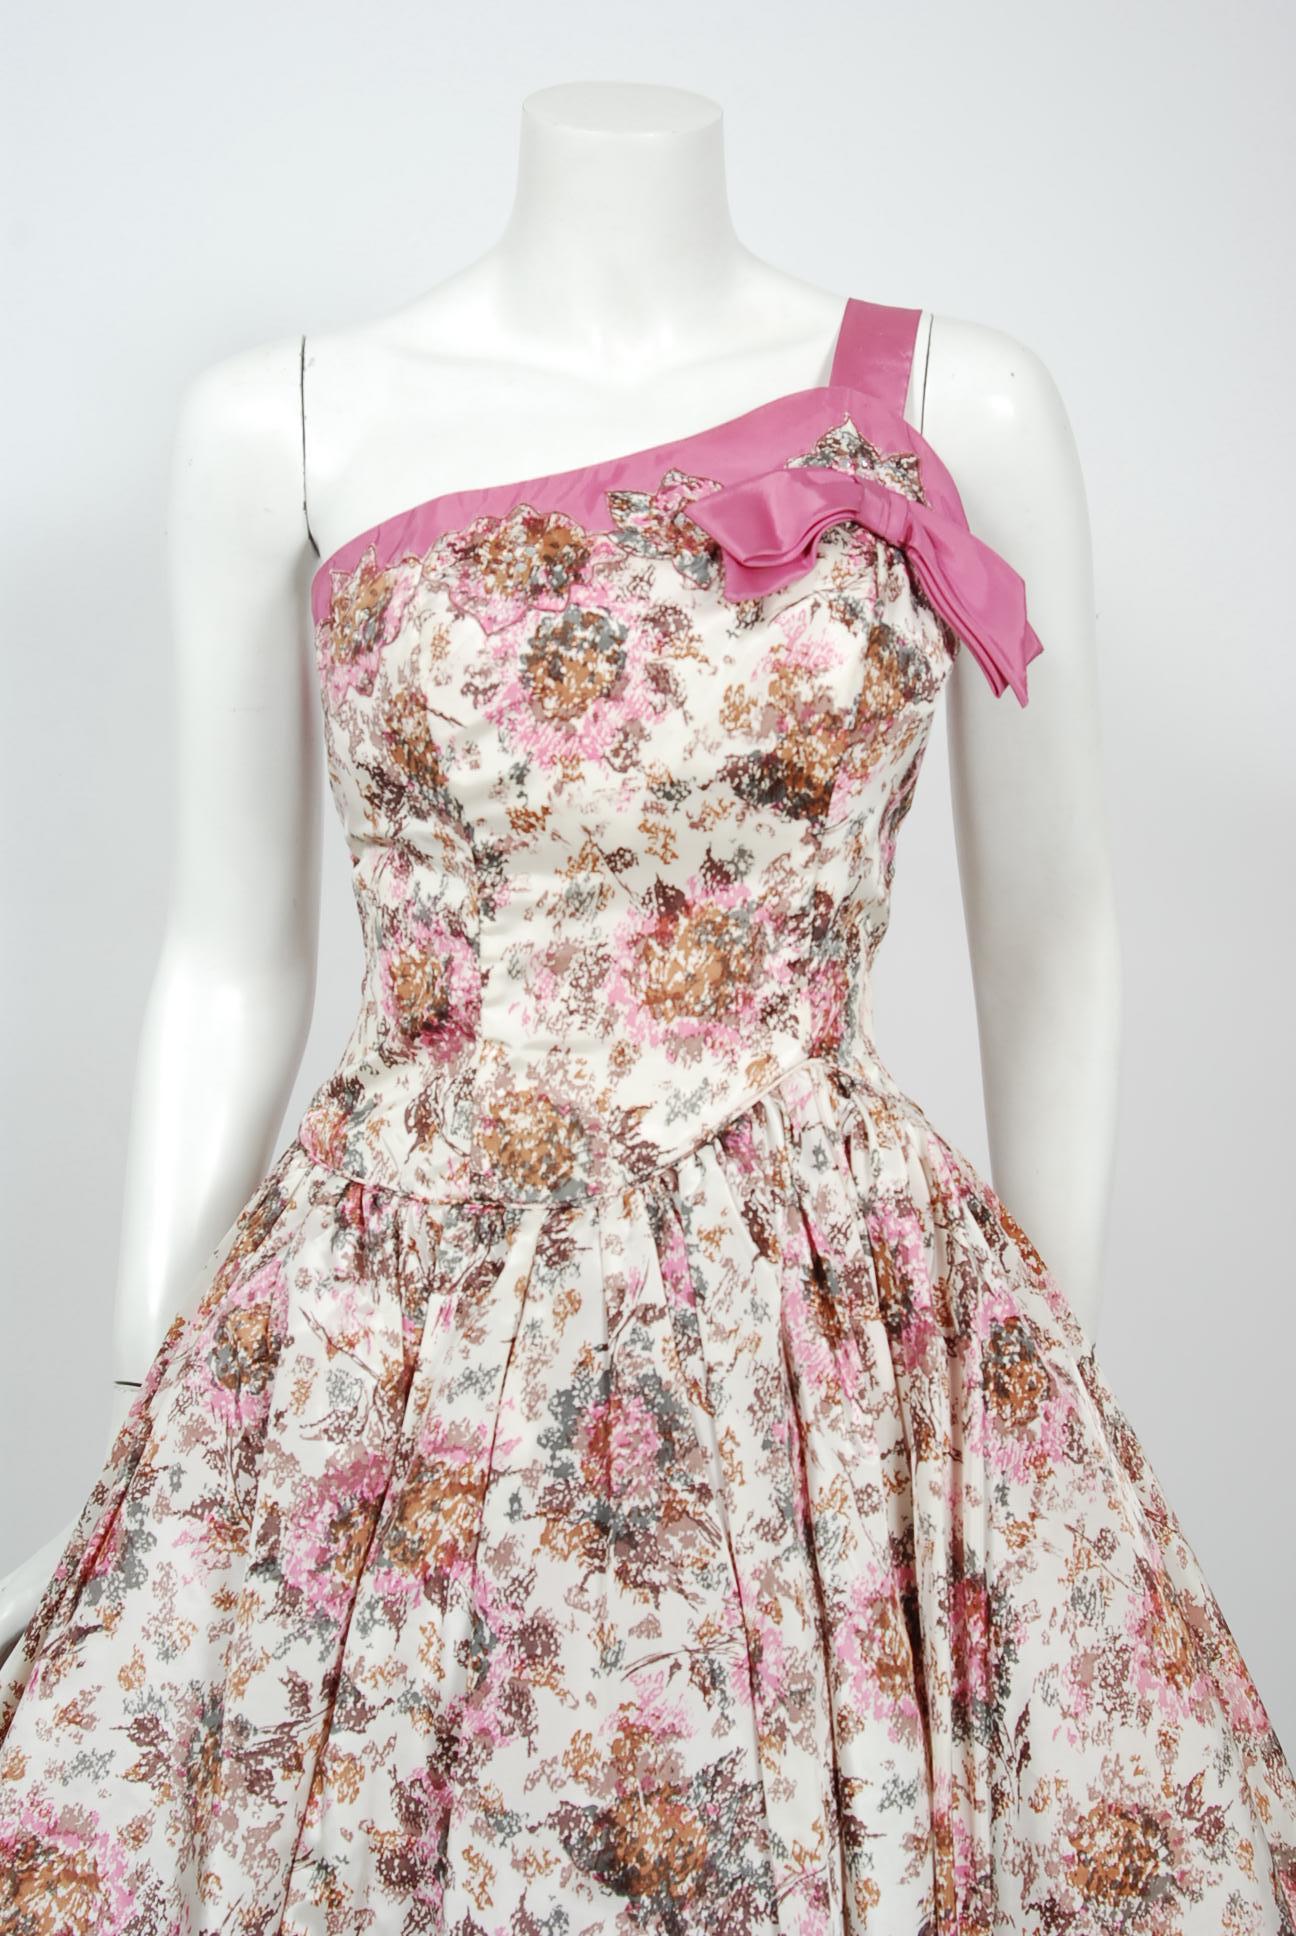 With its vivid pink floral-garden watercolor print and flawless 